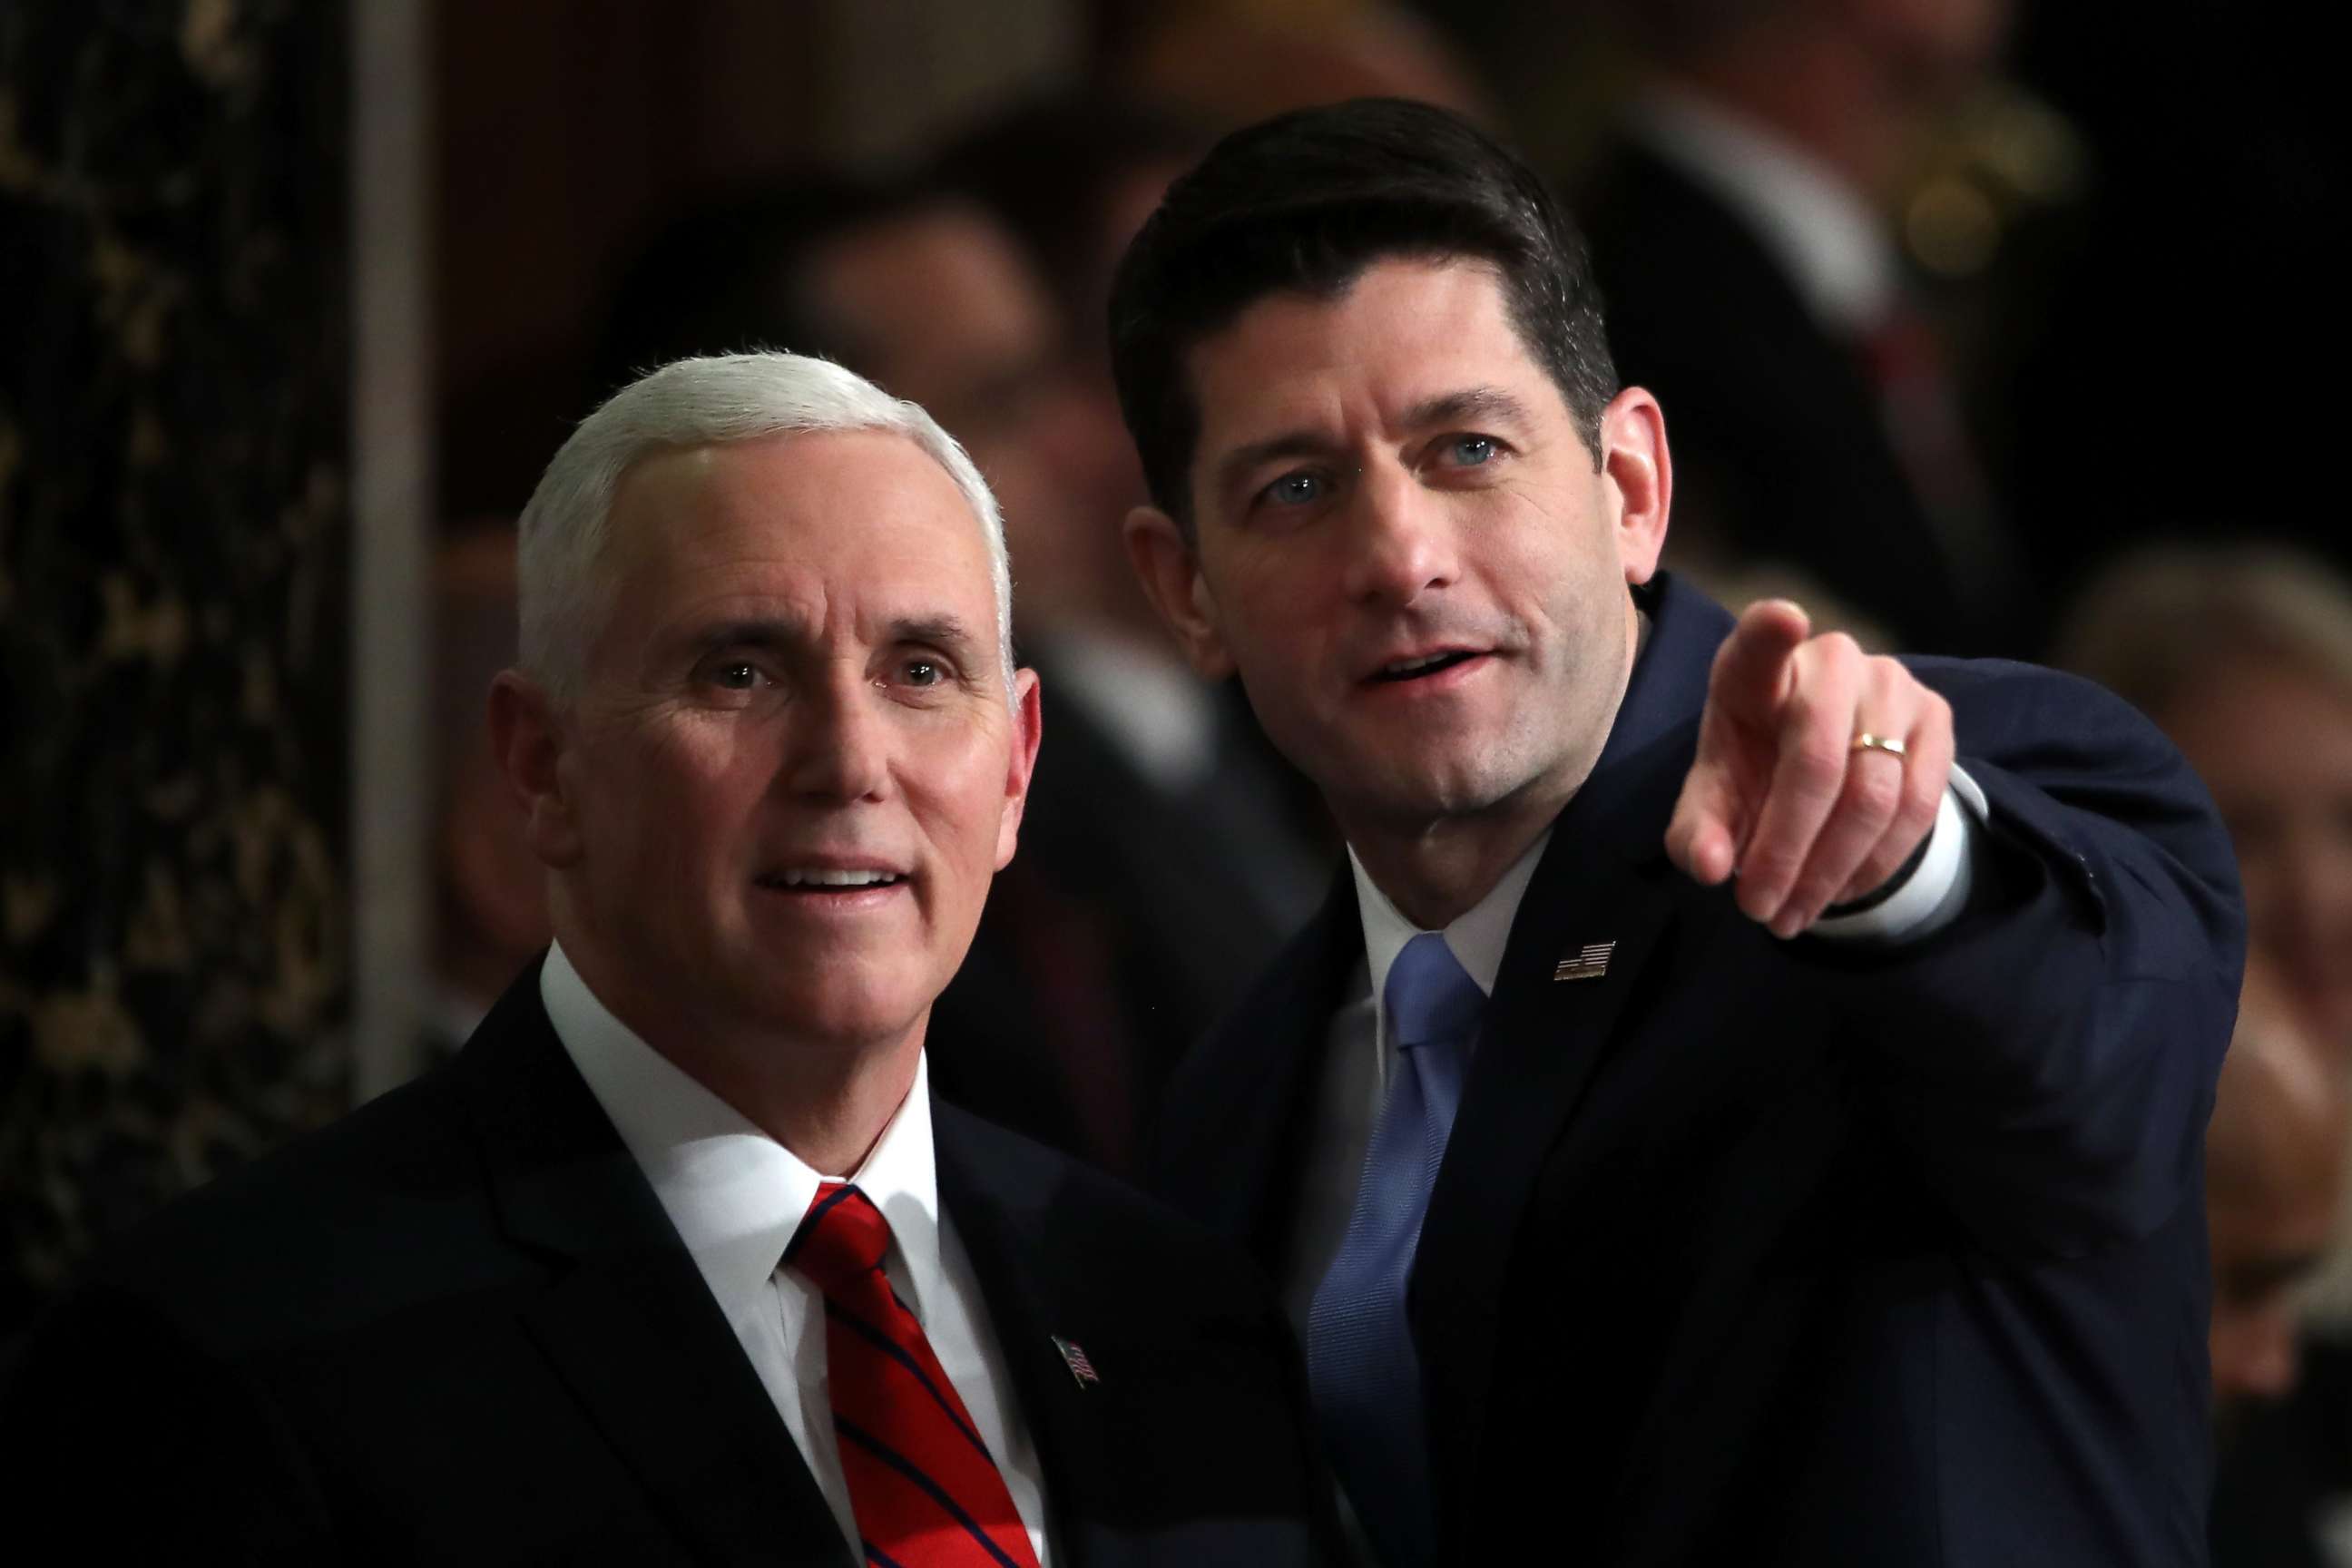 PHOTO: Vice President Mike Pence and Speaker of the House Paul Ryan attend the State of the Union address in the chamber of the U.S. House of Representatives Jan. 30, 2018 in Washington.